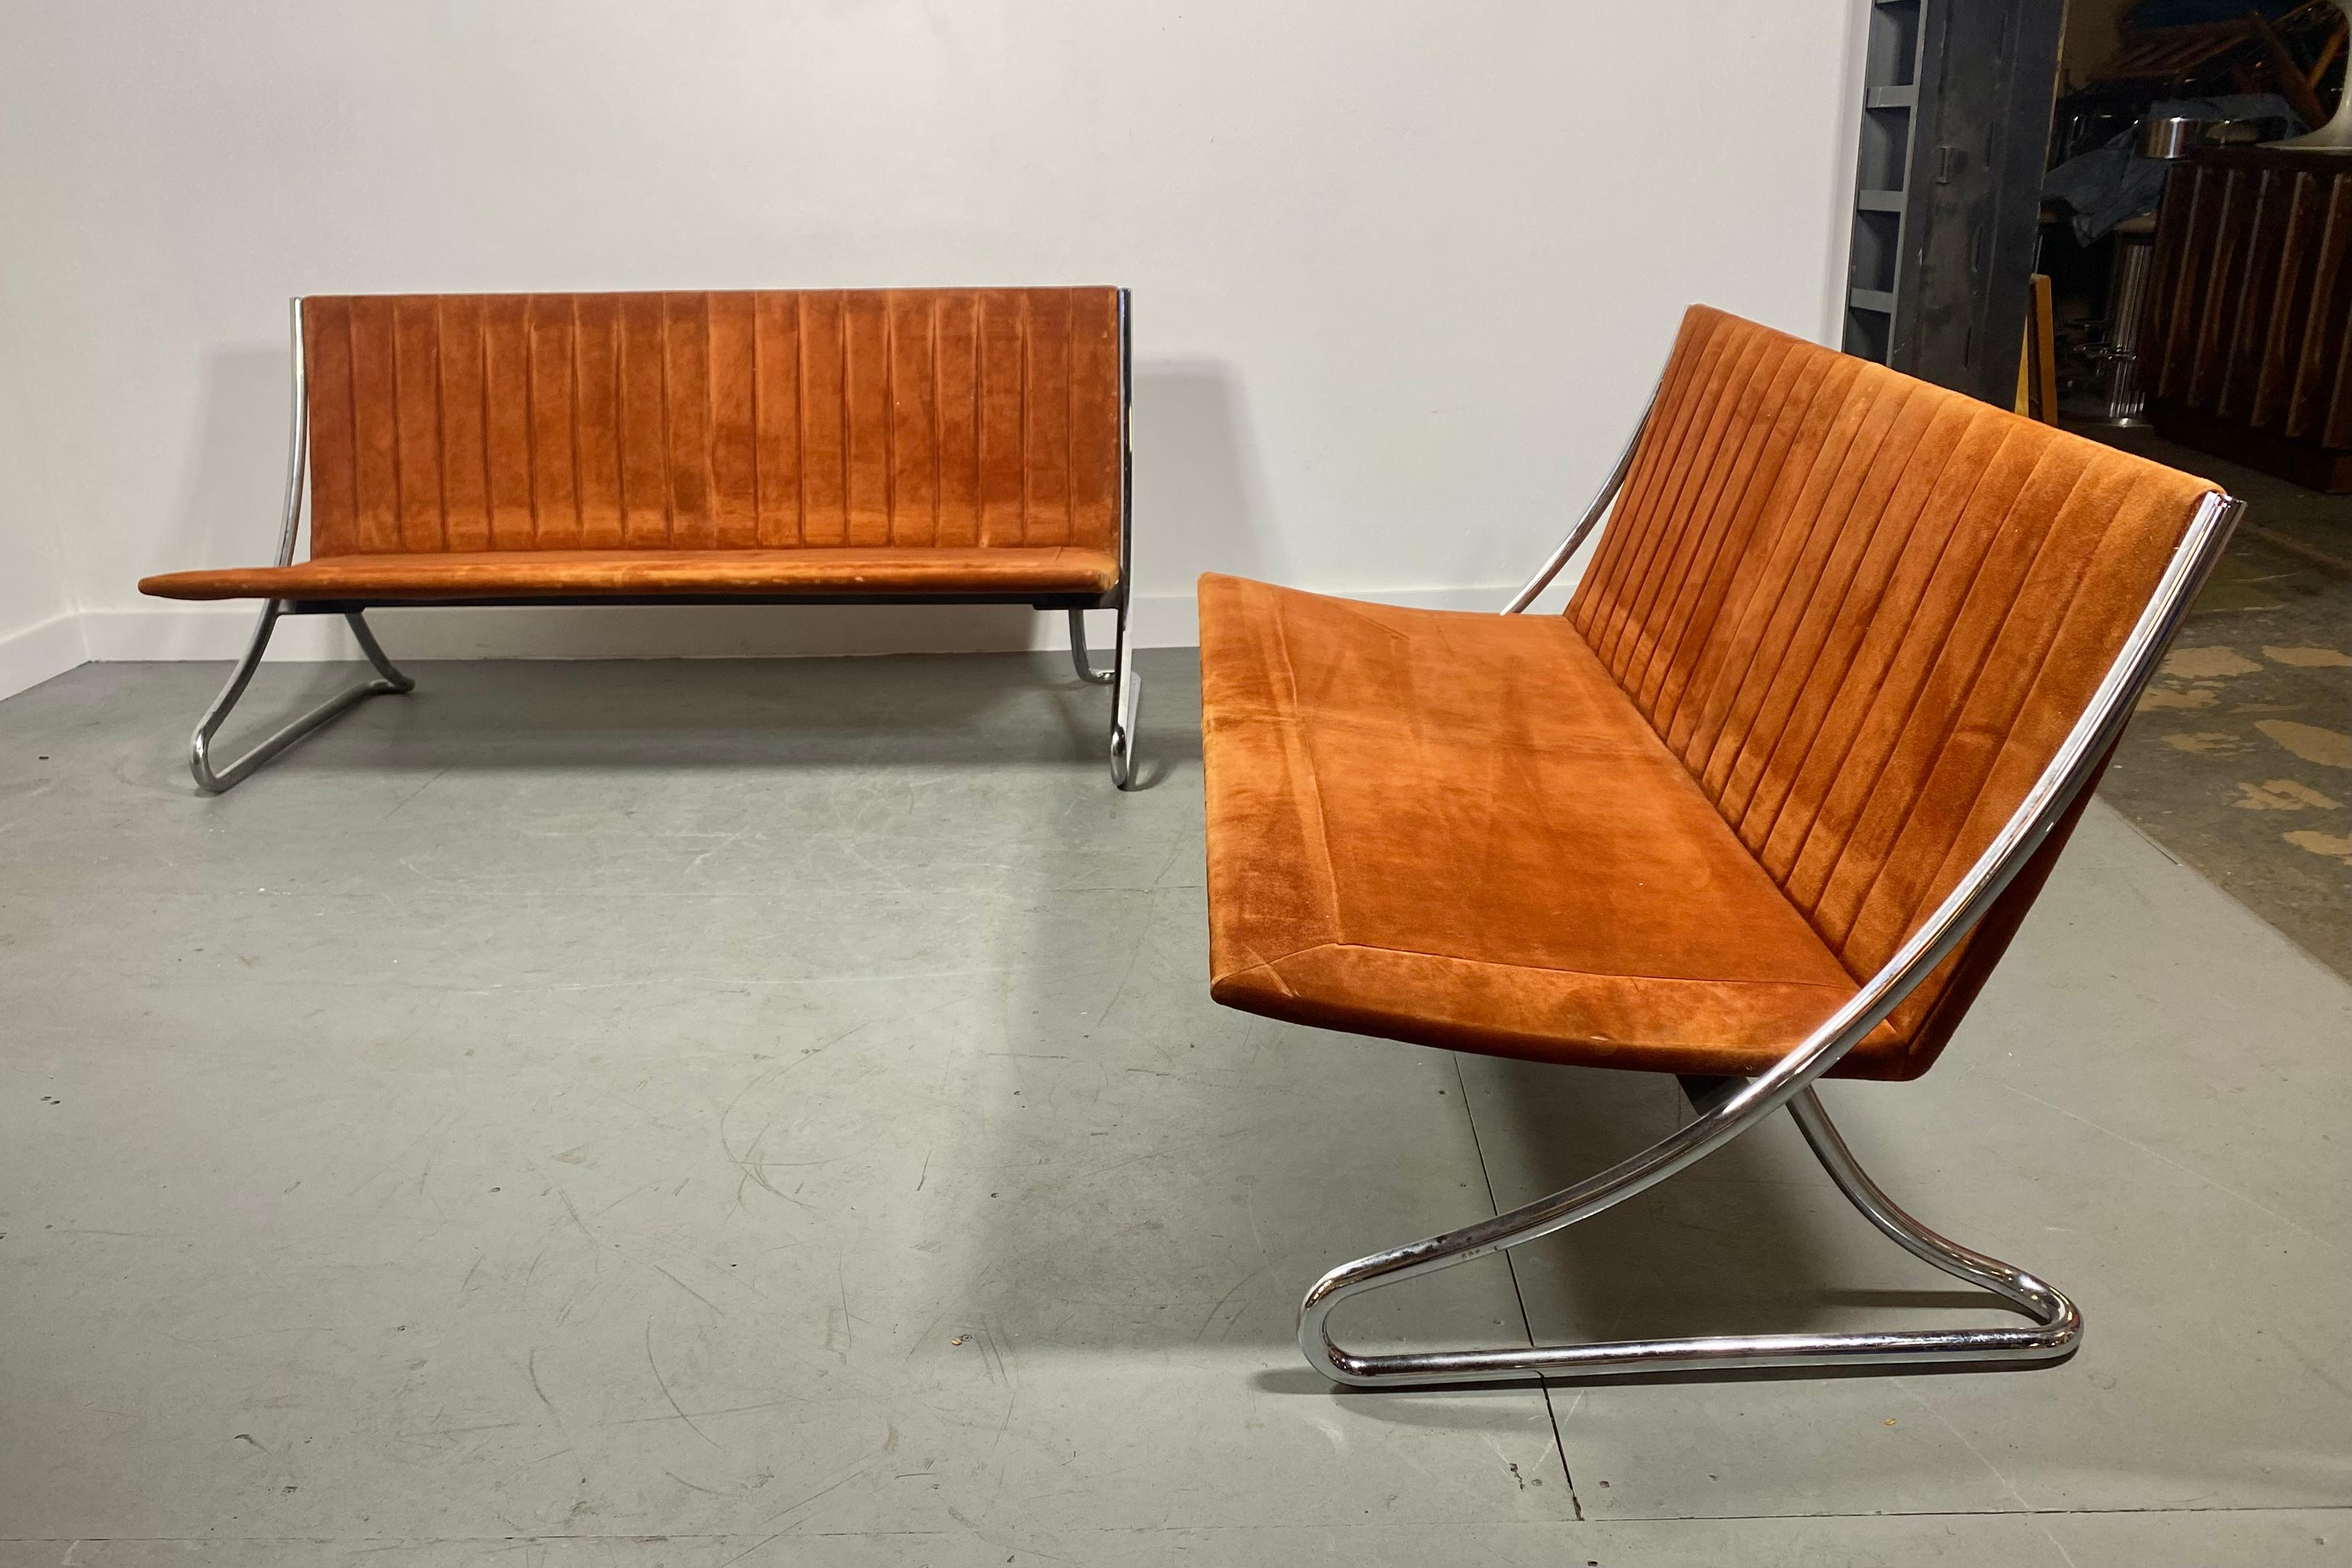 Late 20th Century Leif Jacobsen Sette's Steel Frames & Suede Ribbed Upholstery, Modern / Spaceage